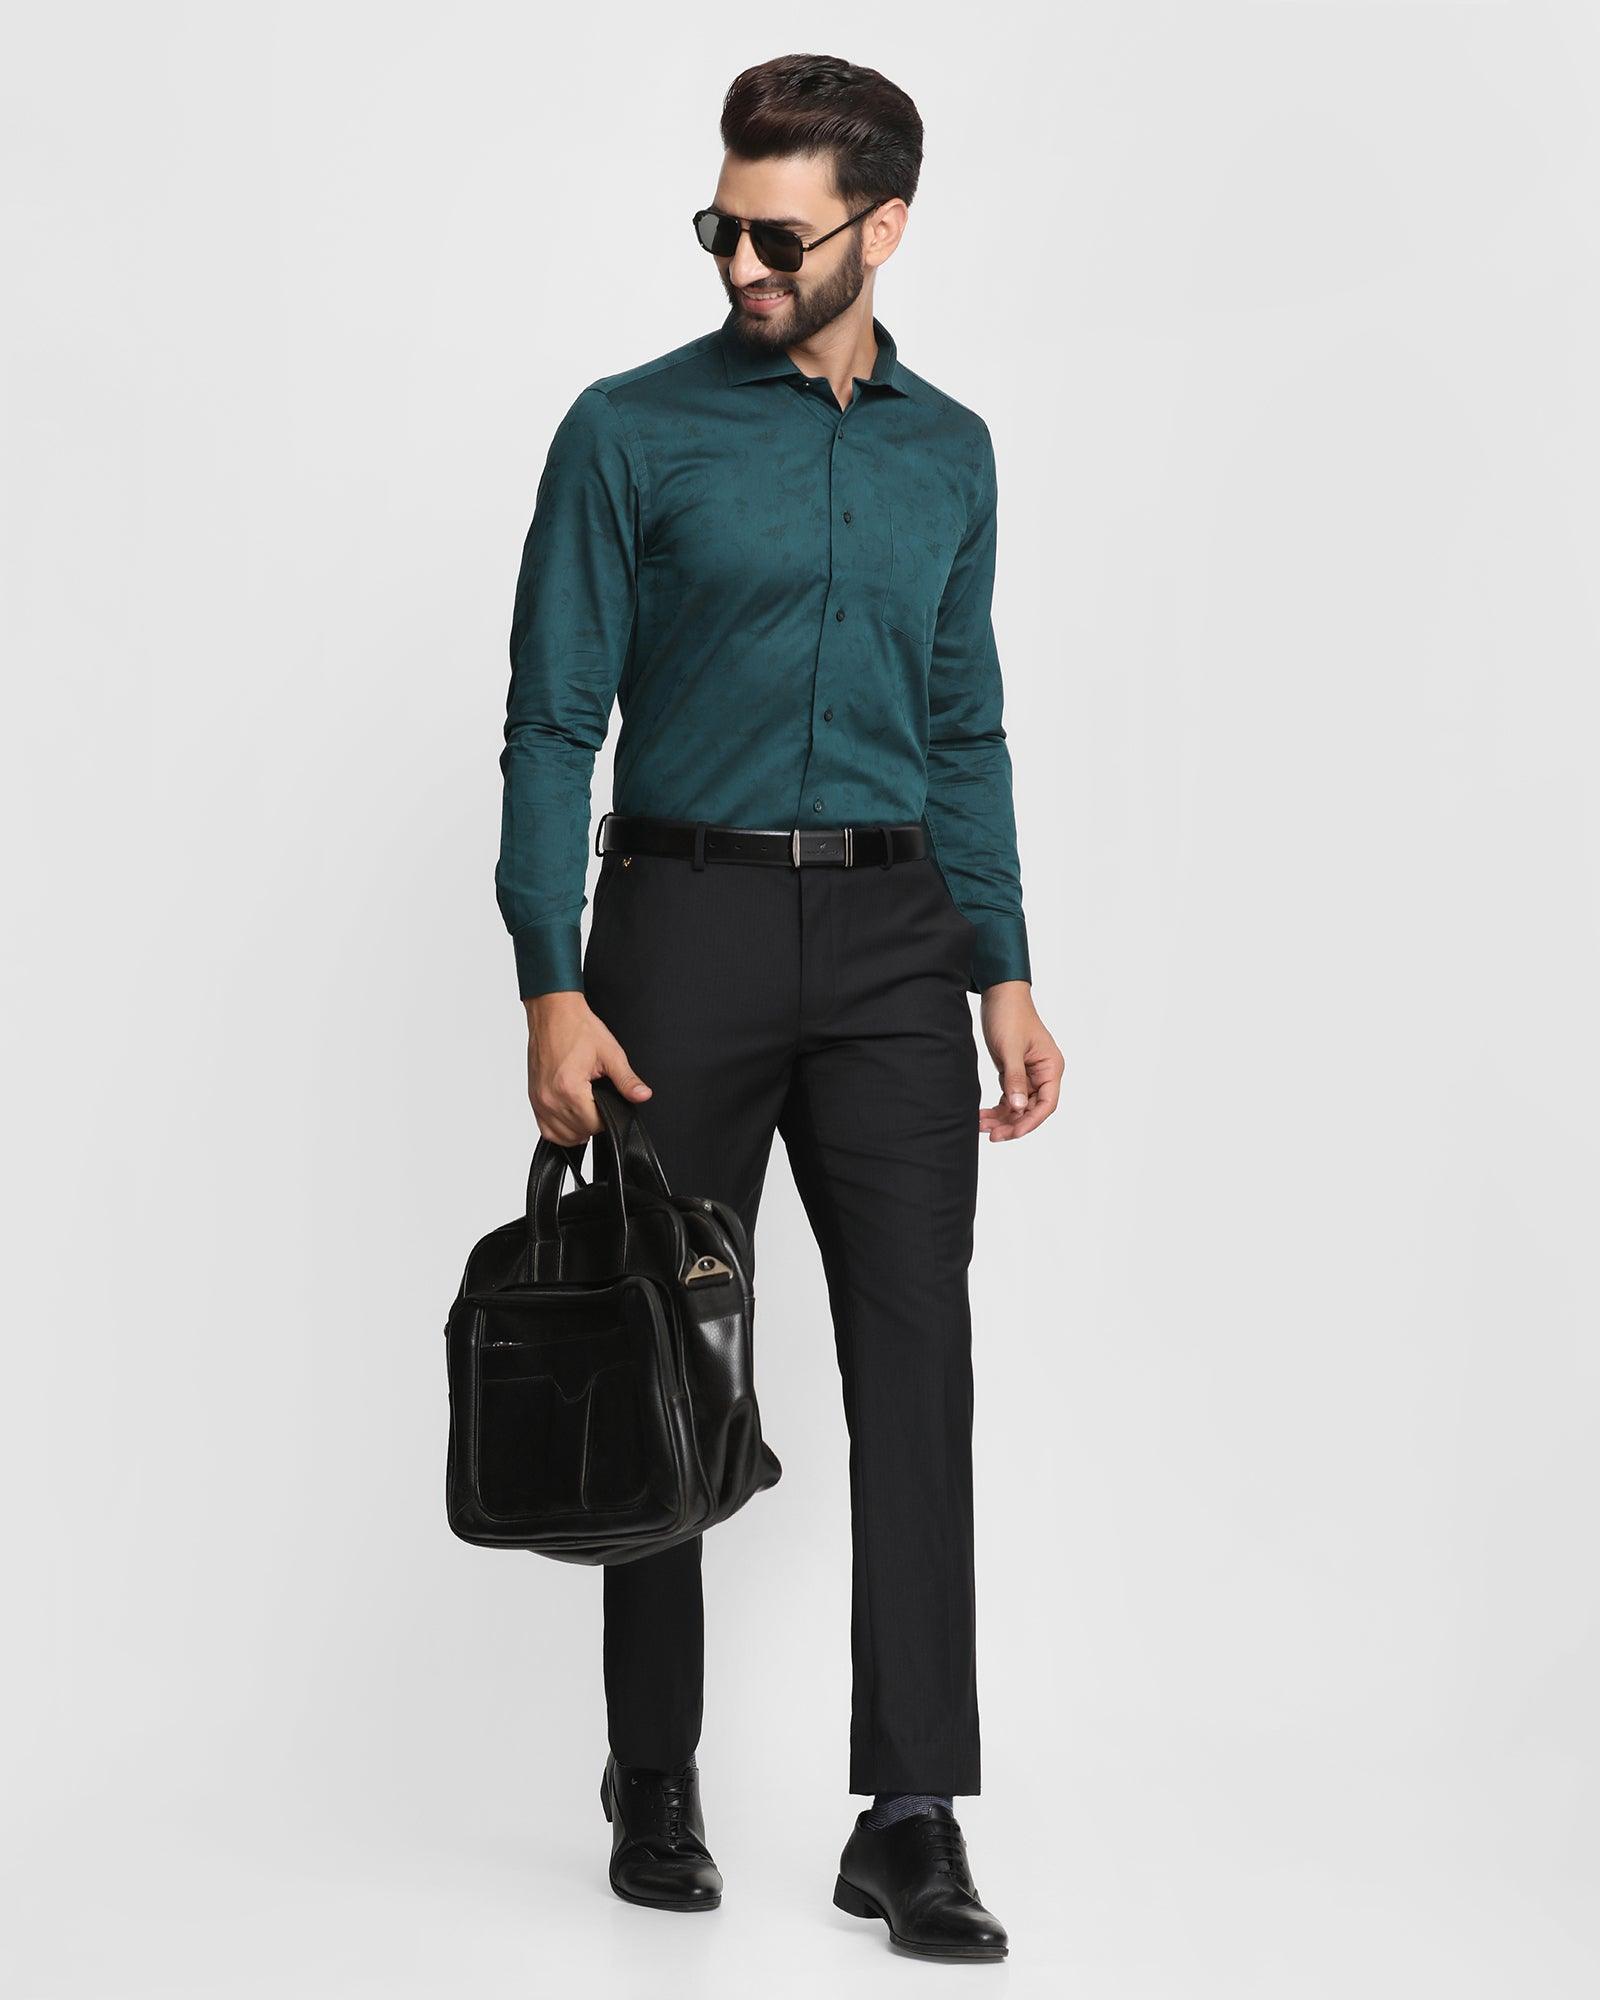 What color pants would go well with a teal color shirt? - Quora